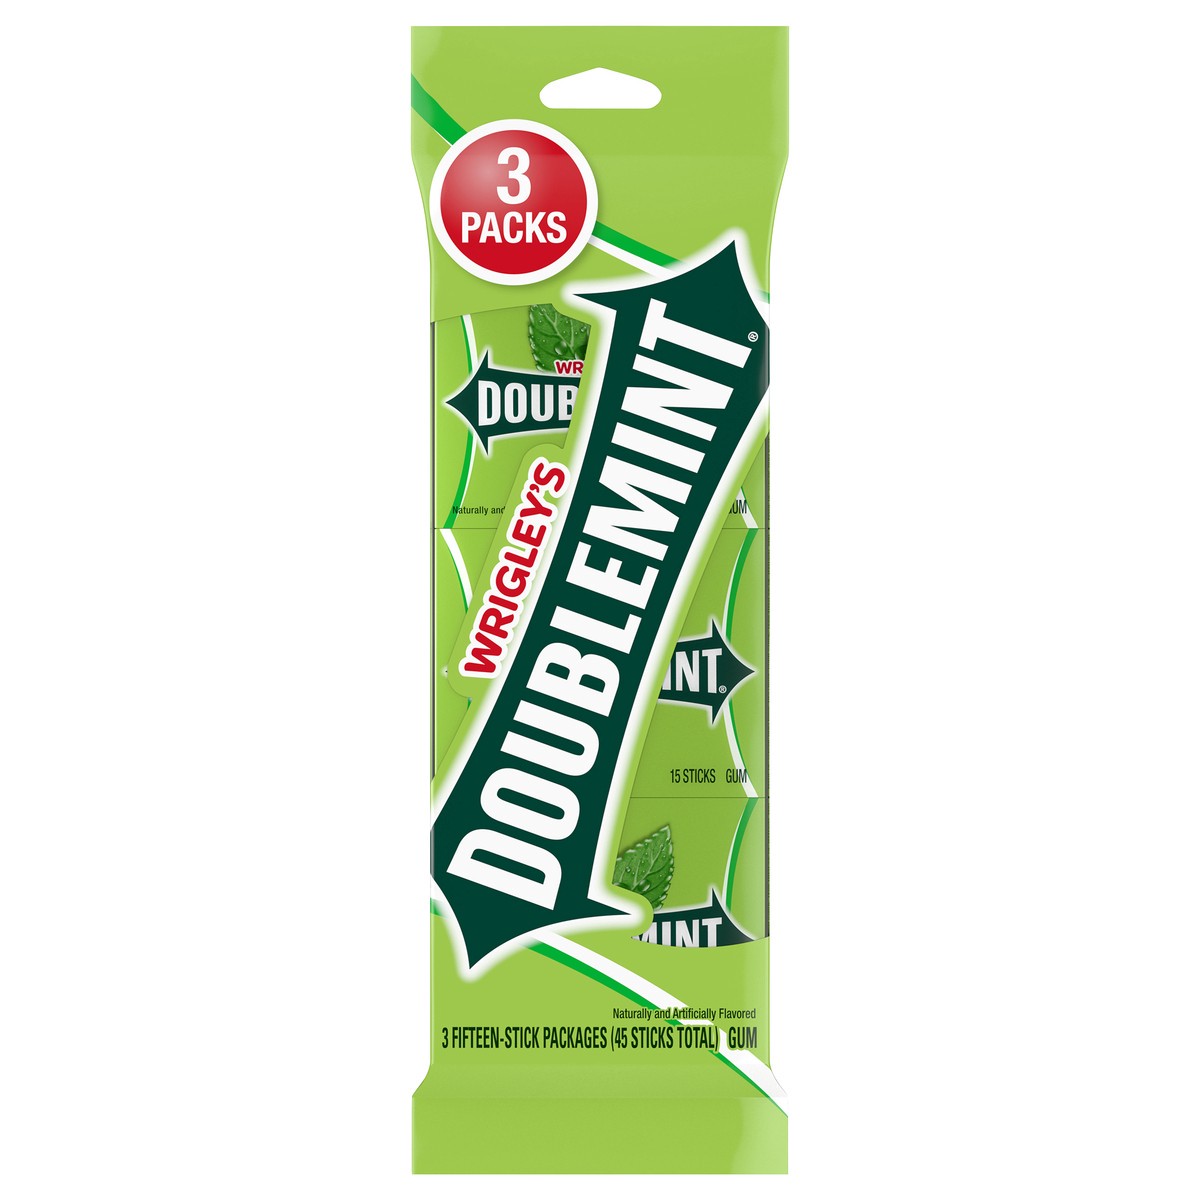 slide 1 of 134, Doublemint WRIGLEY'S DOUBLEMINT Bulk Chewing Gum, Value Pack, 15 ct (3 Pack), 45 ct